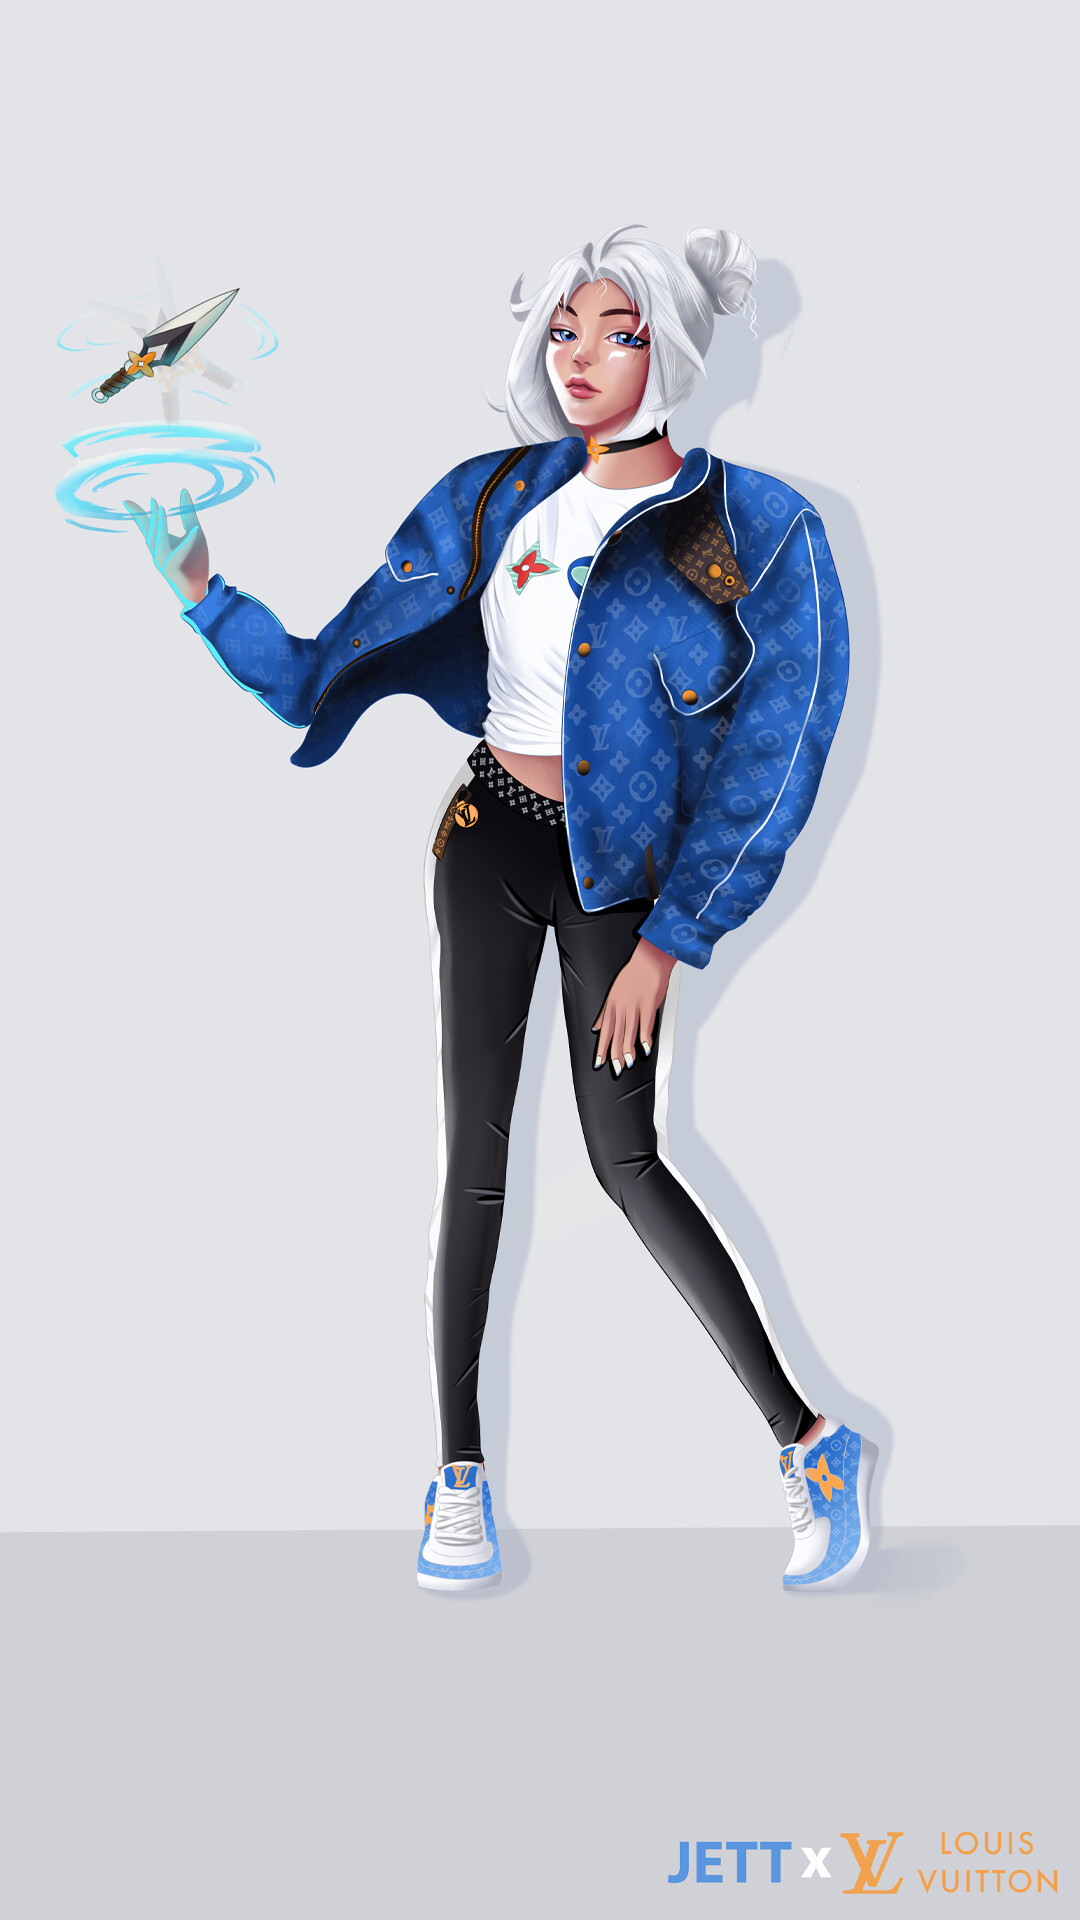 Drawing League of Legends new skin Louis Vuitton designed outfits